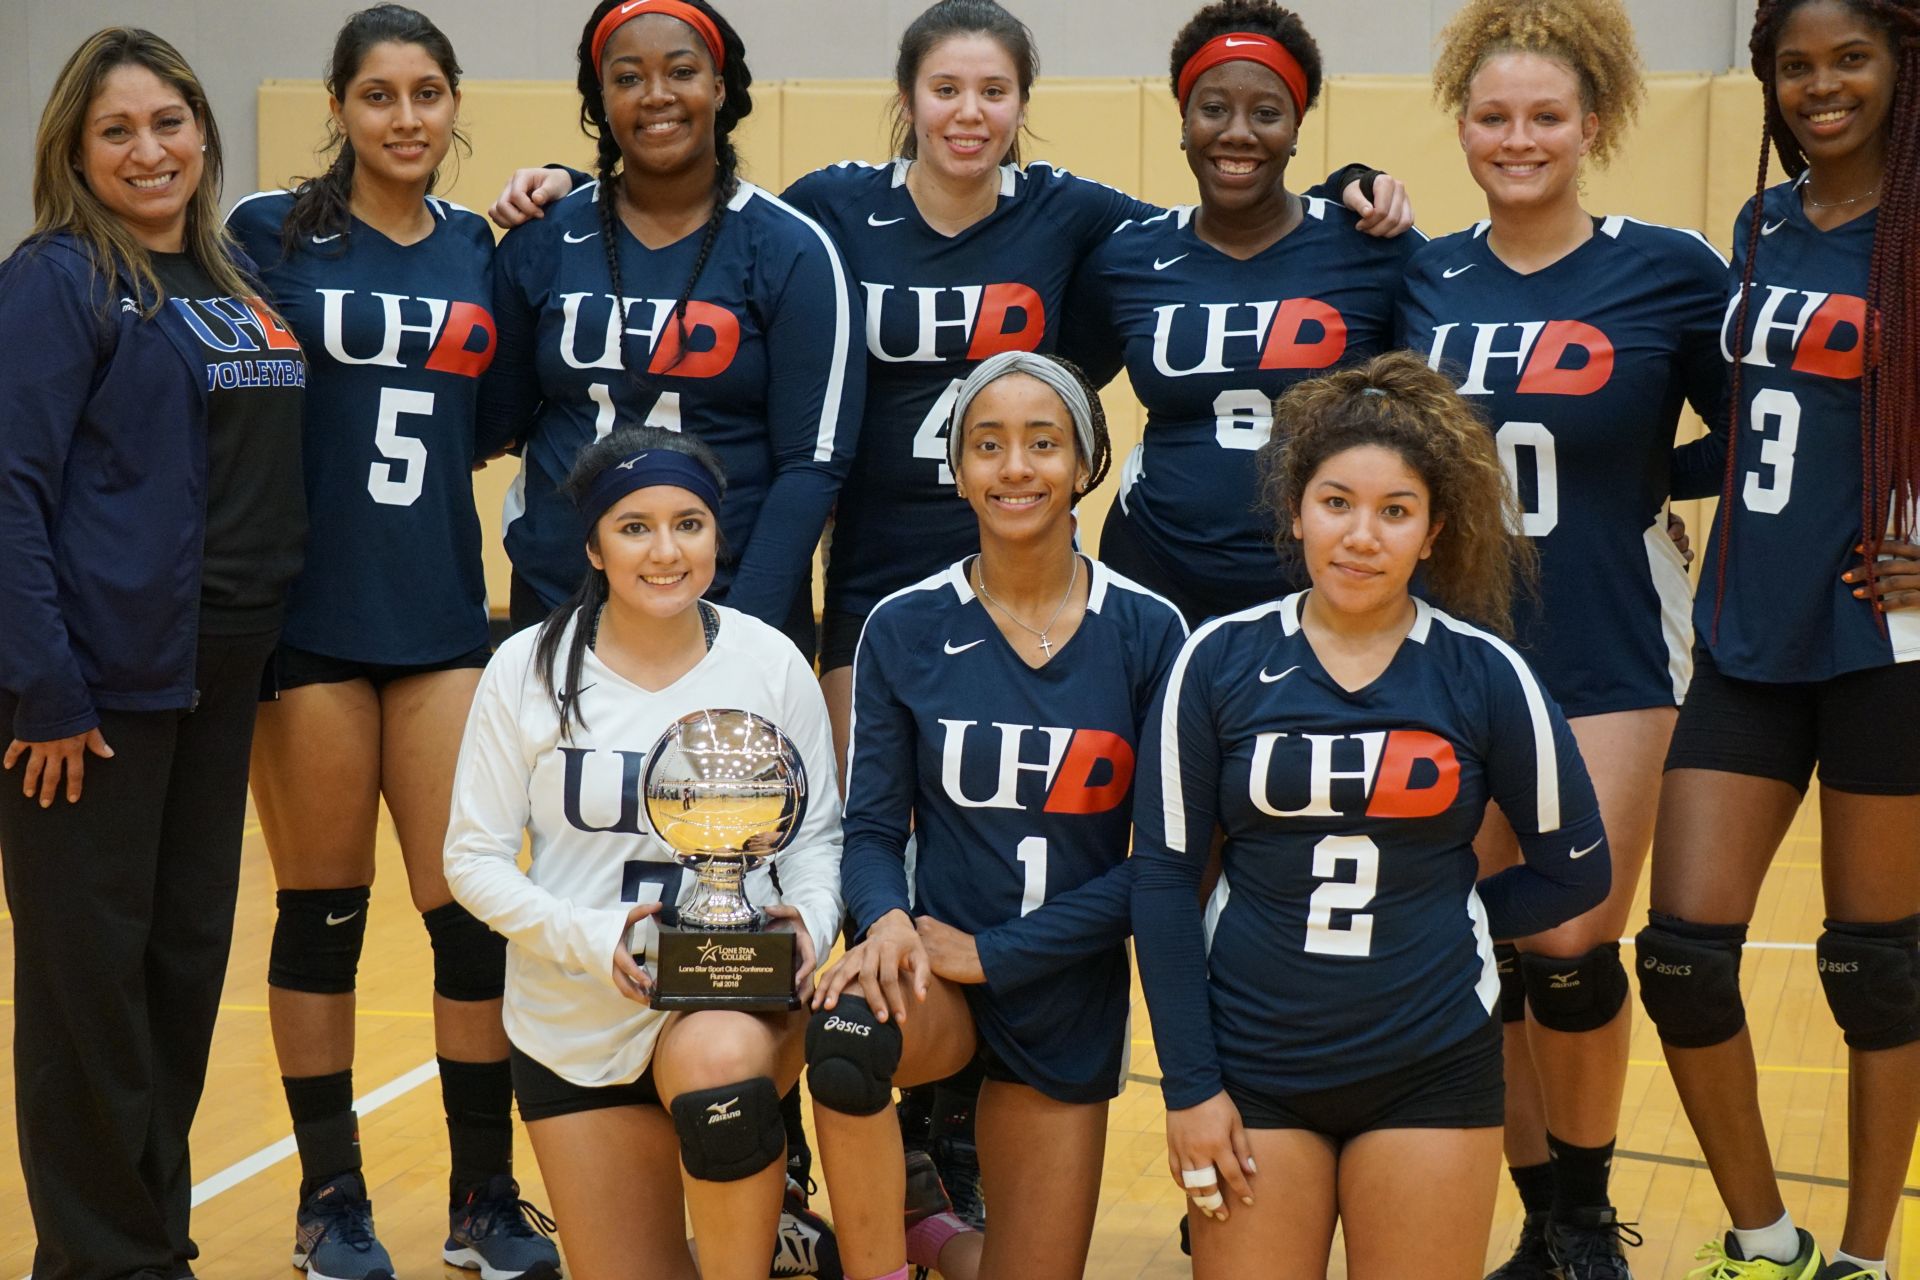 Photo of students from UofH-Downtown team with a trophy